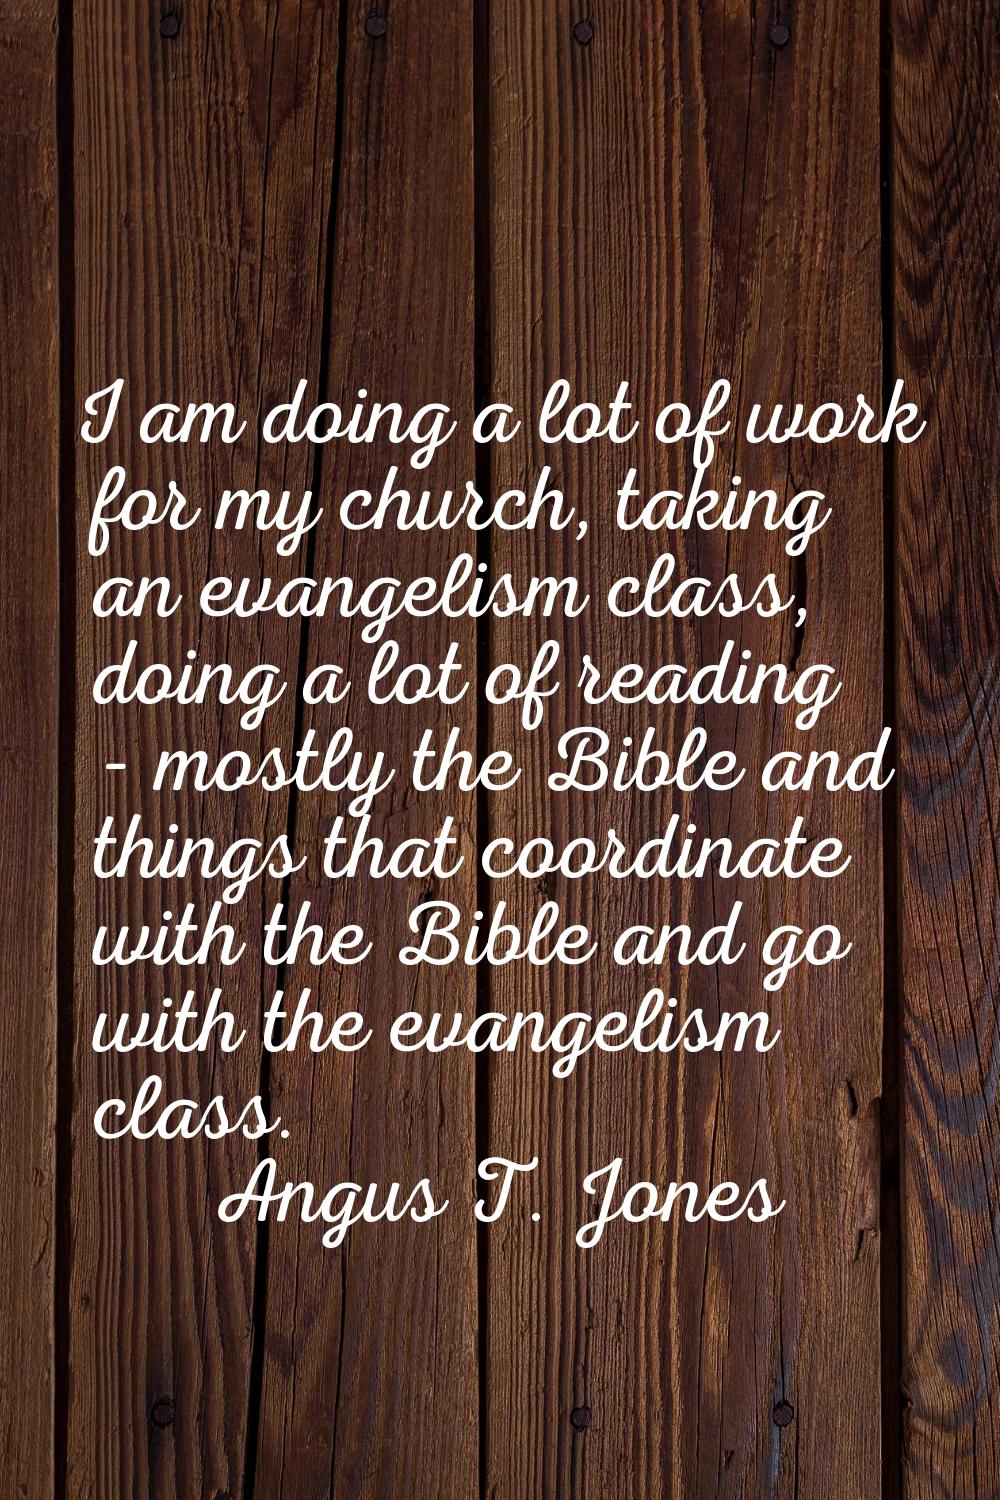 I am doing a lot of work for my church, taking an evangelism class, doing a lot of reading - mostly